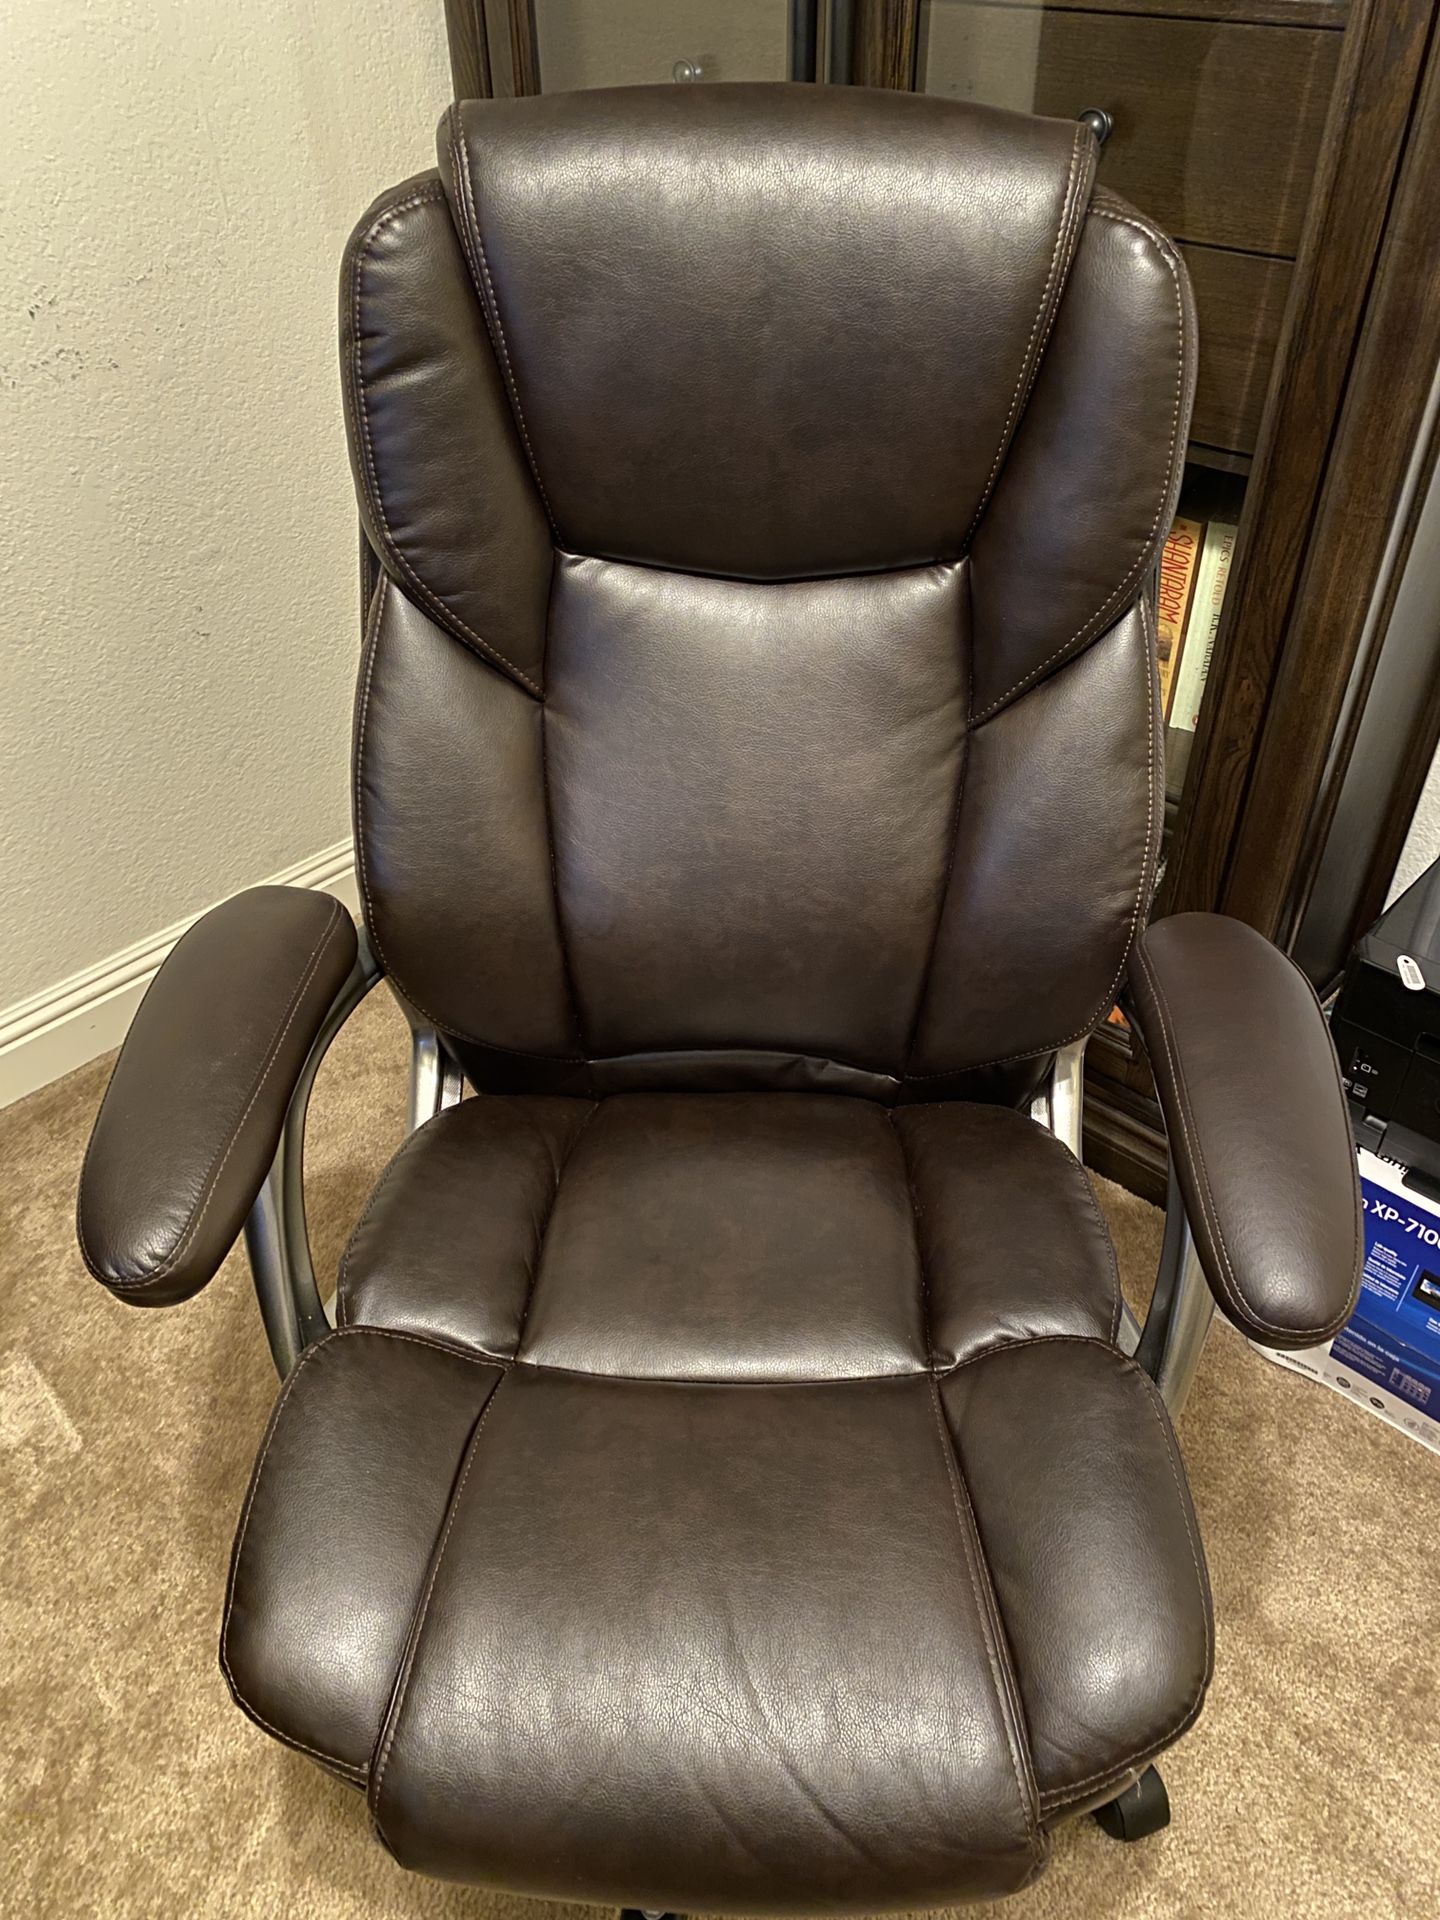 Realspace cressfield high back executive chair